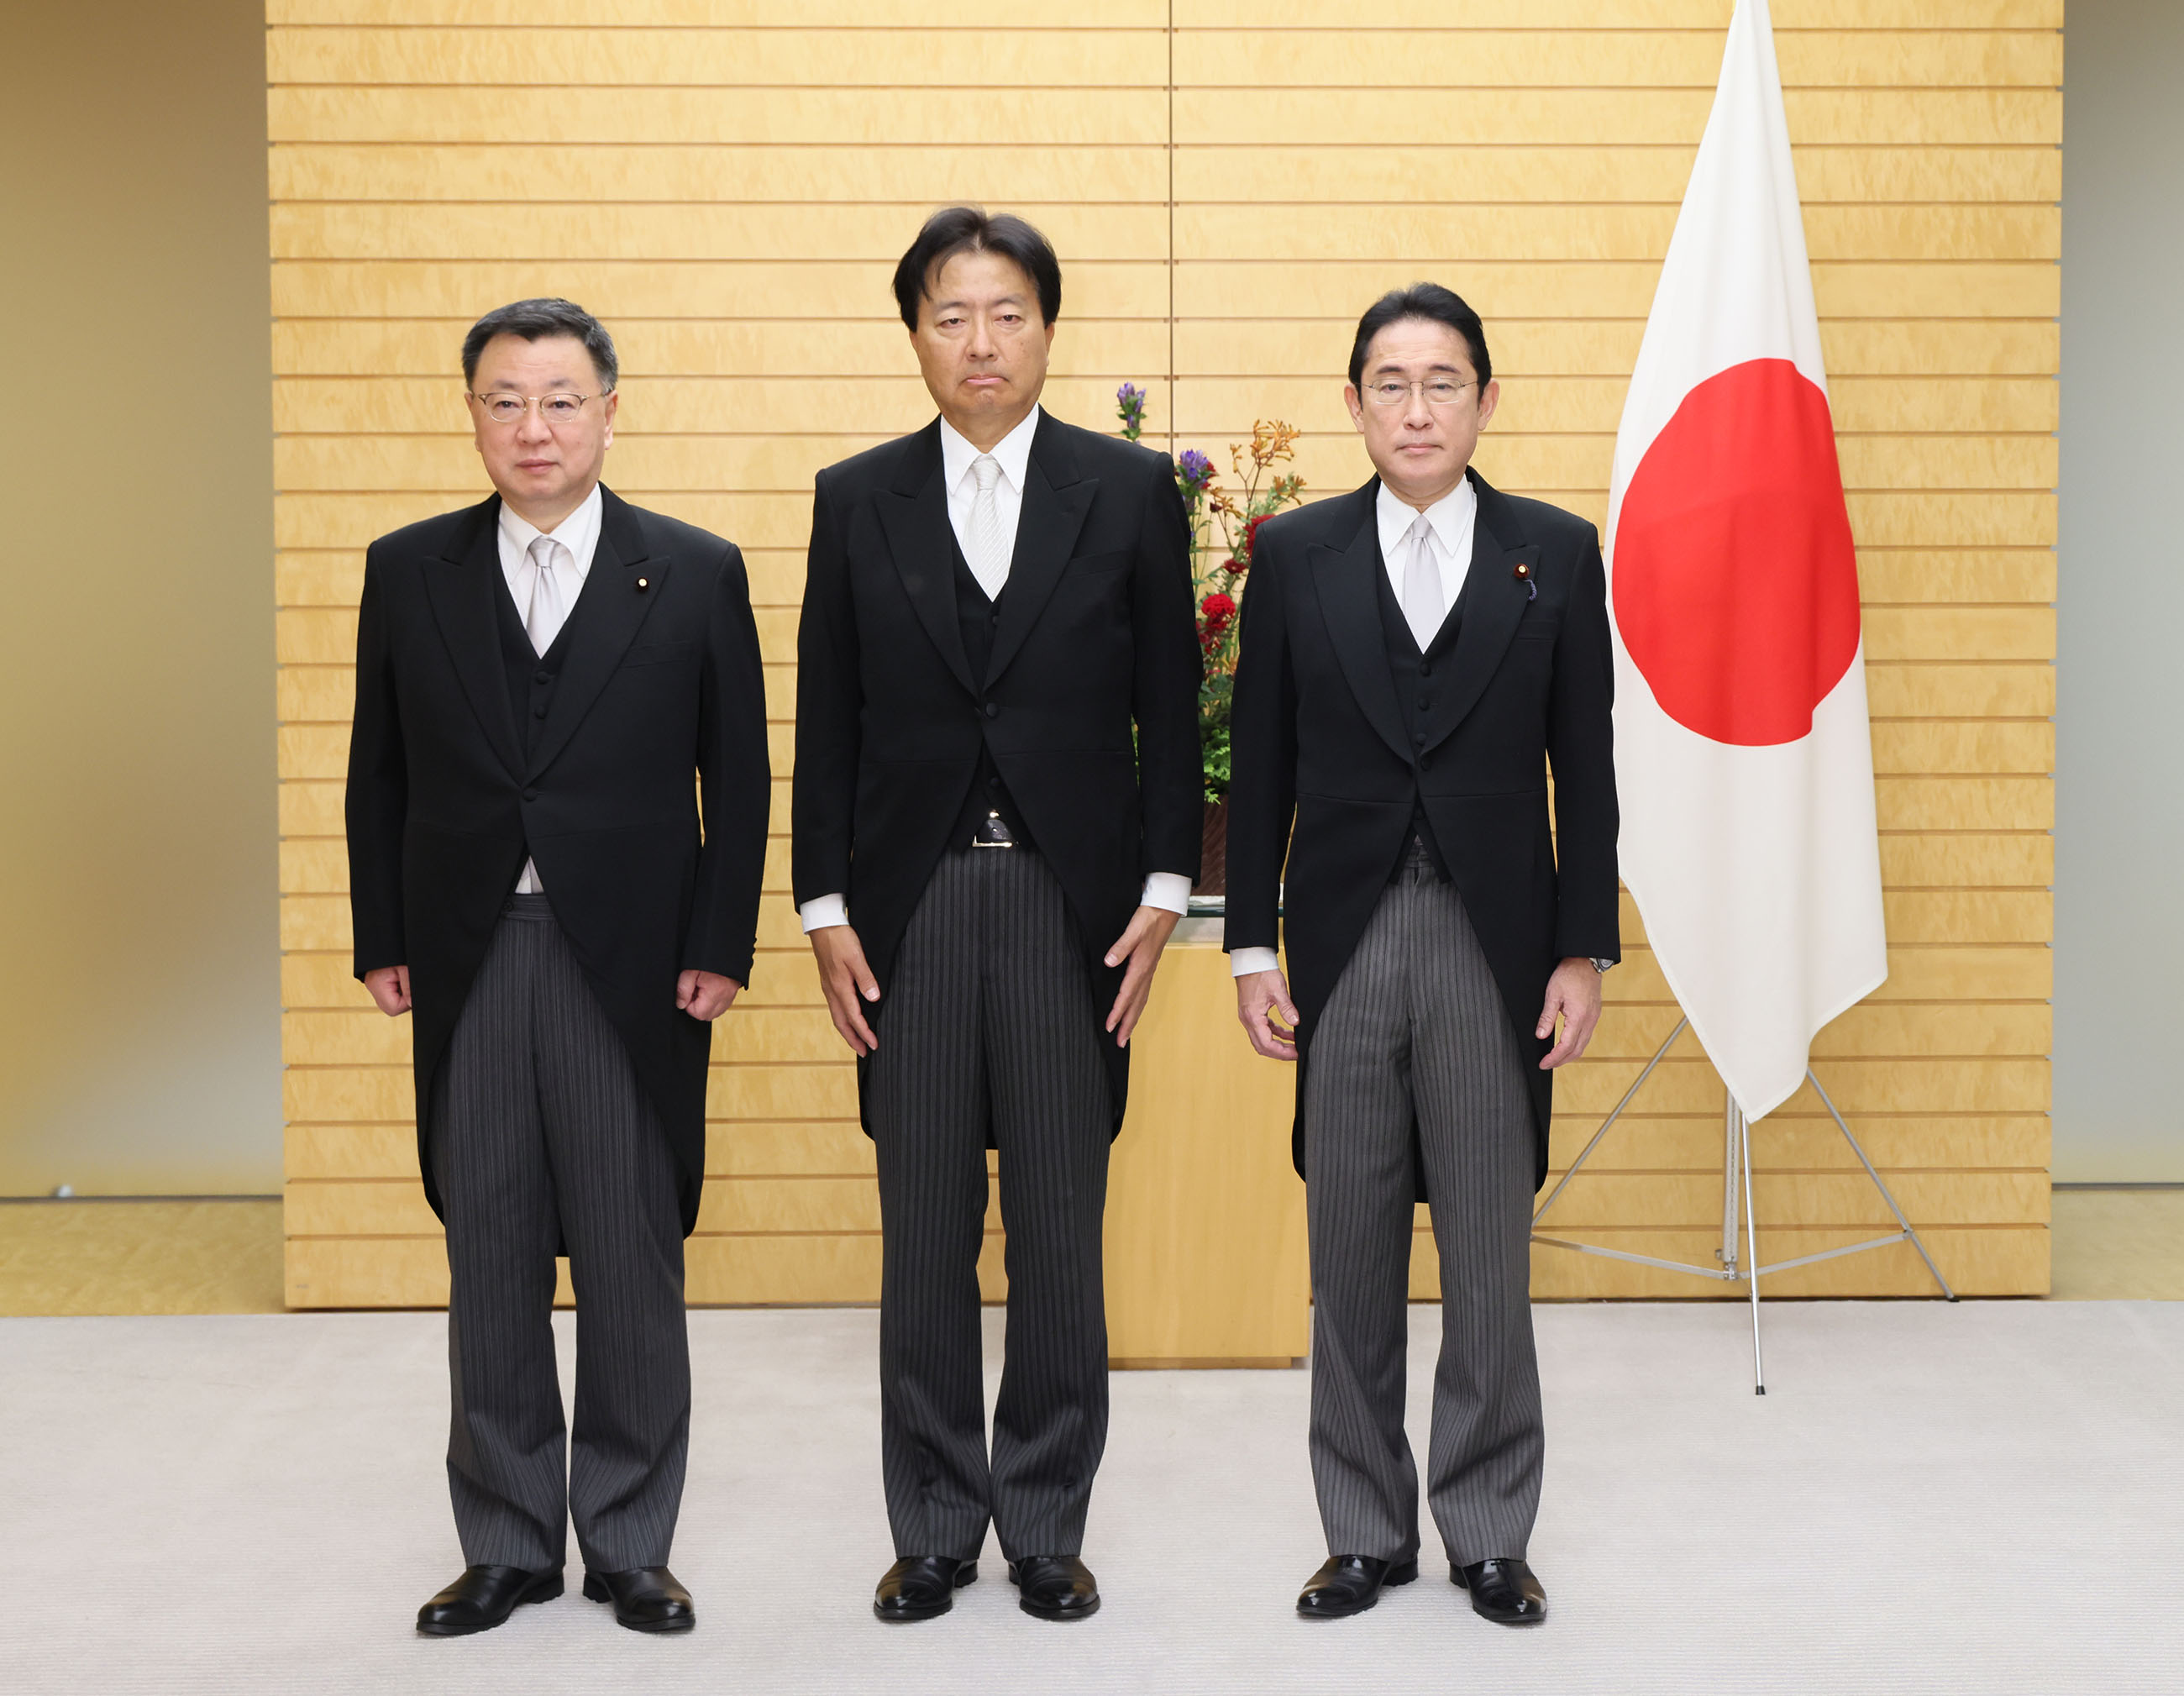 Prime Minister Kishida attending a photograph session with State Minister Kadoyama (3)